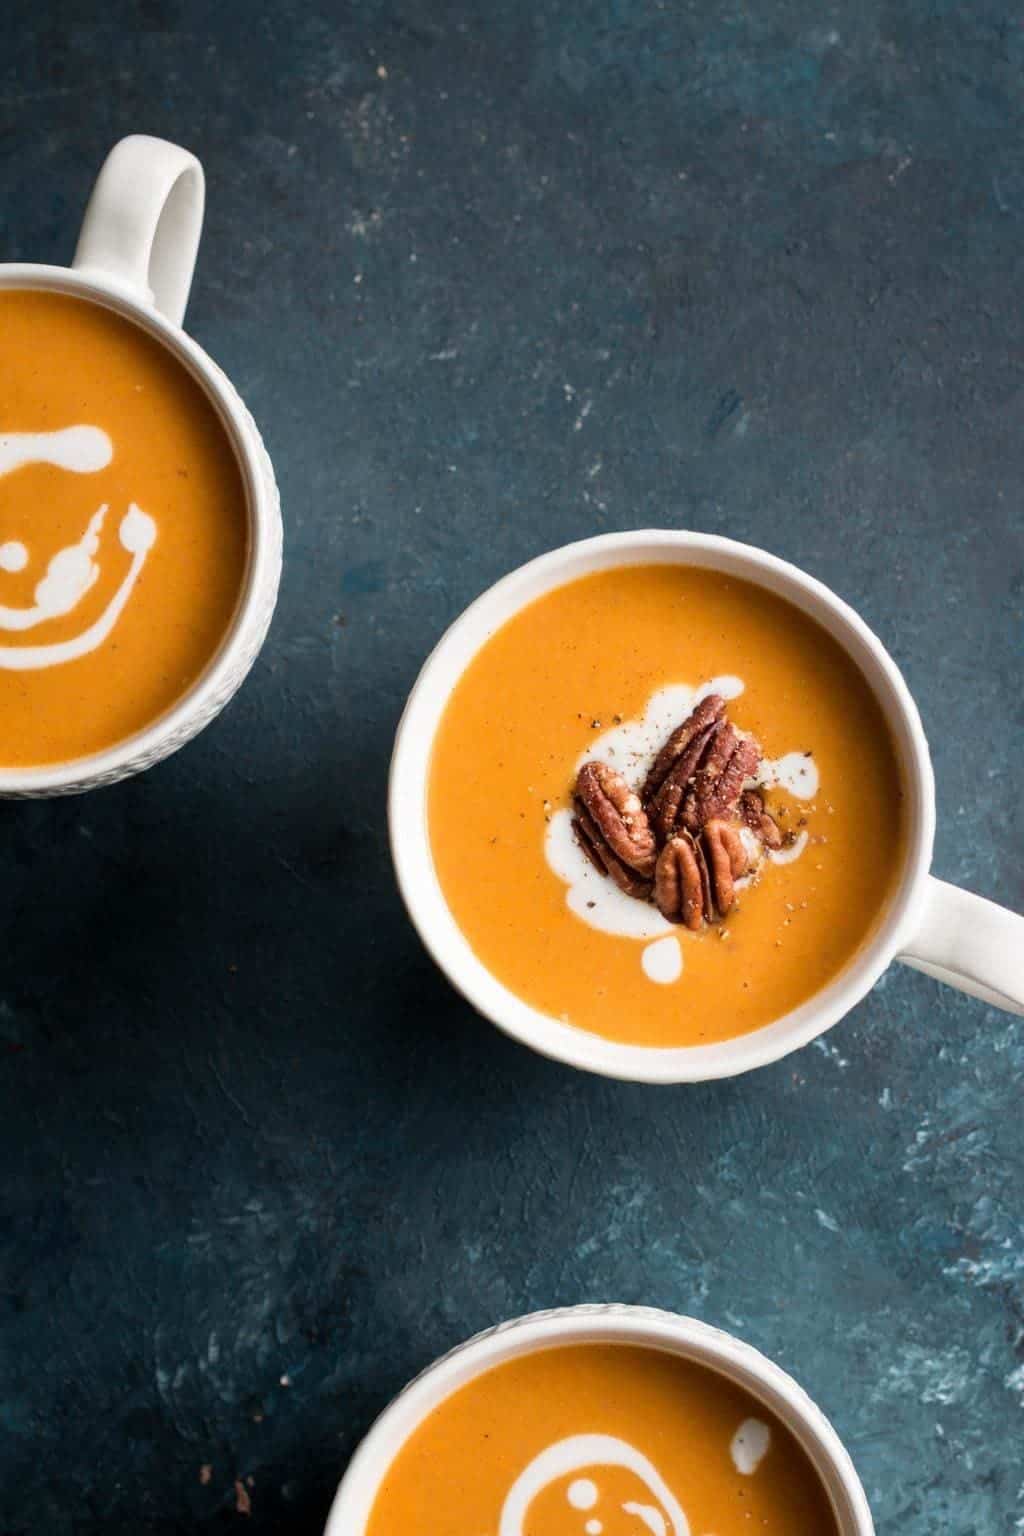 Coriander Sweet Potato Soup with Toasted Cinnamon Pecans